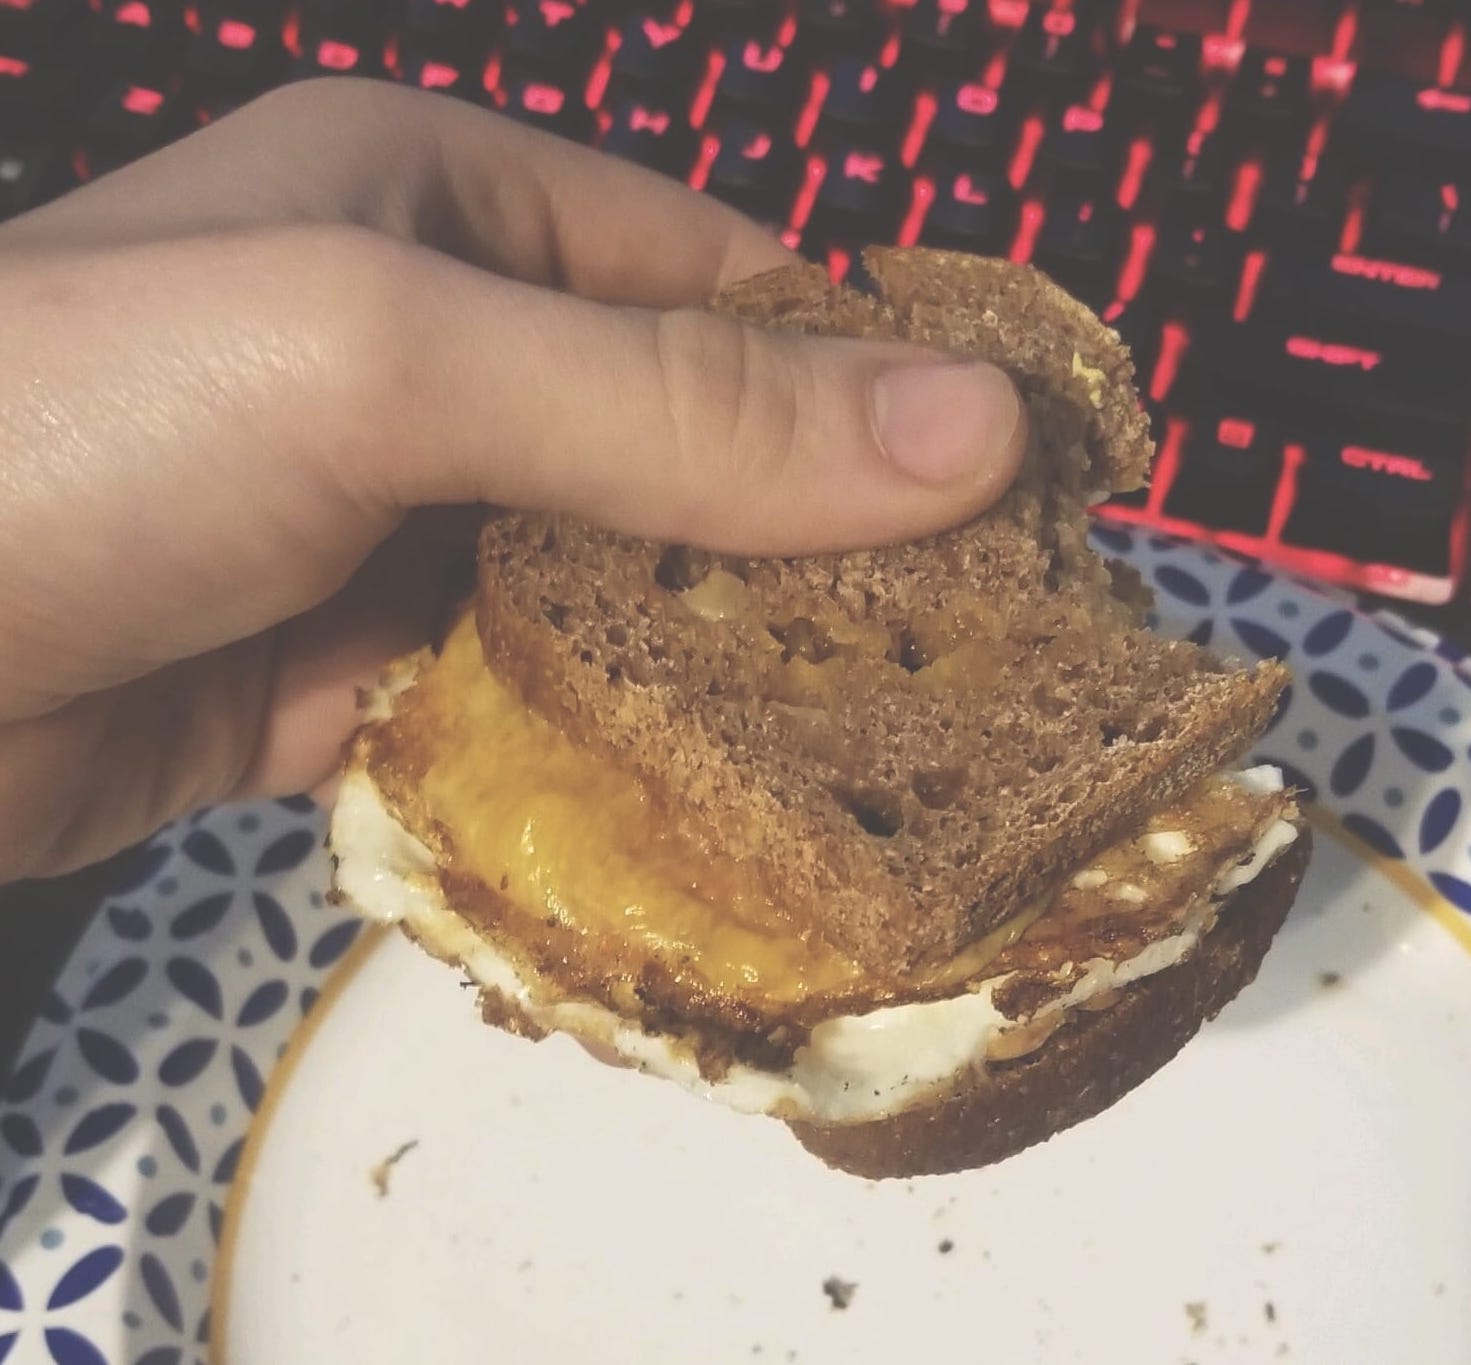 image of a cheese sandwich, being eaten